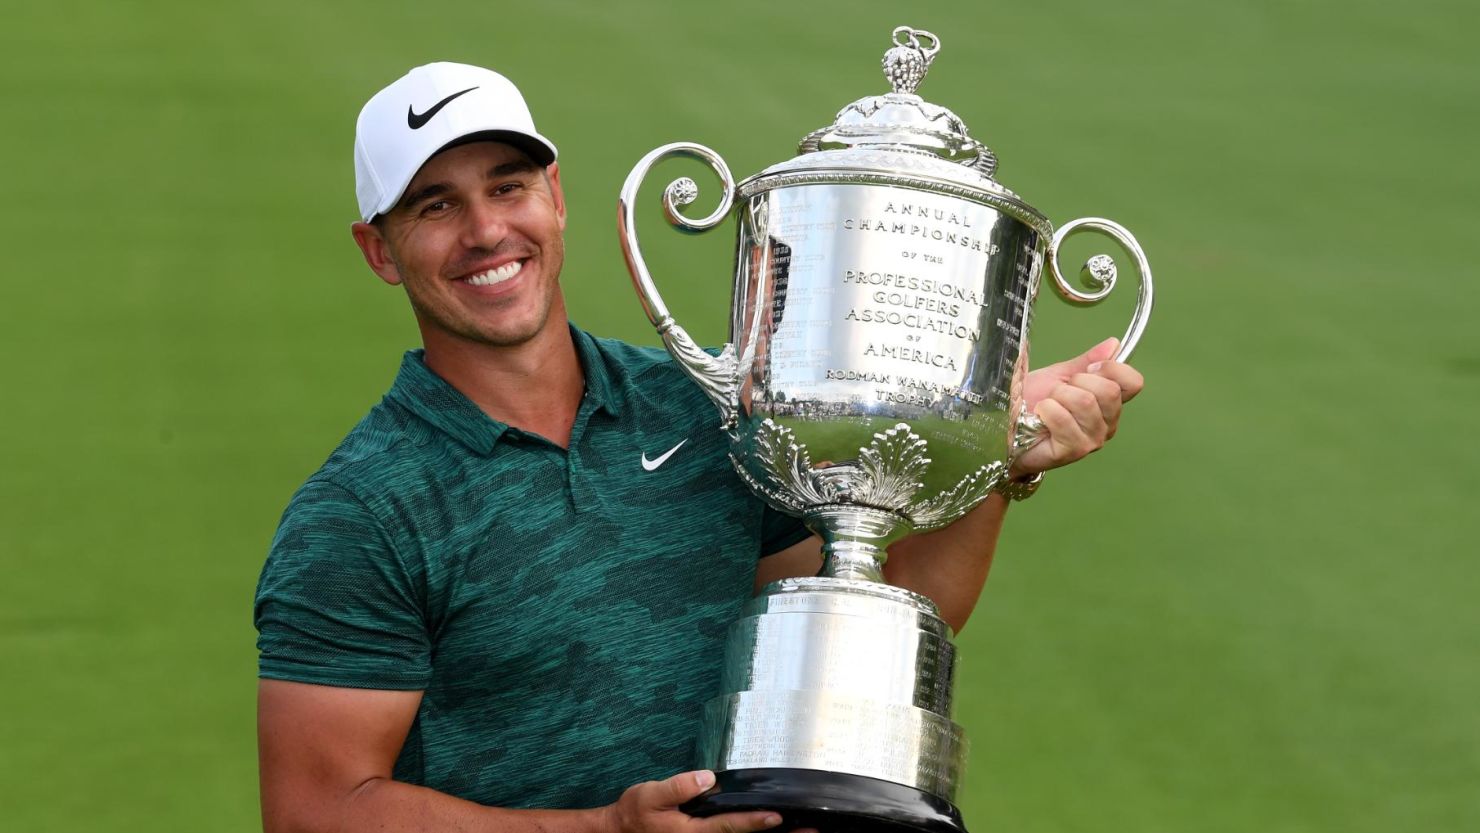 Brooks Koepka clinched the 2018 US PGA title for a third major in 14 months.